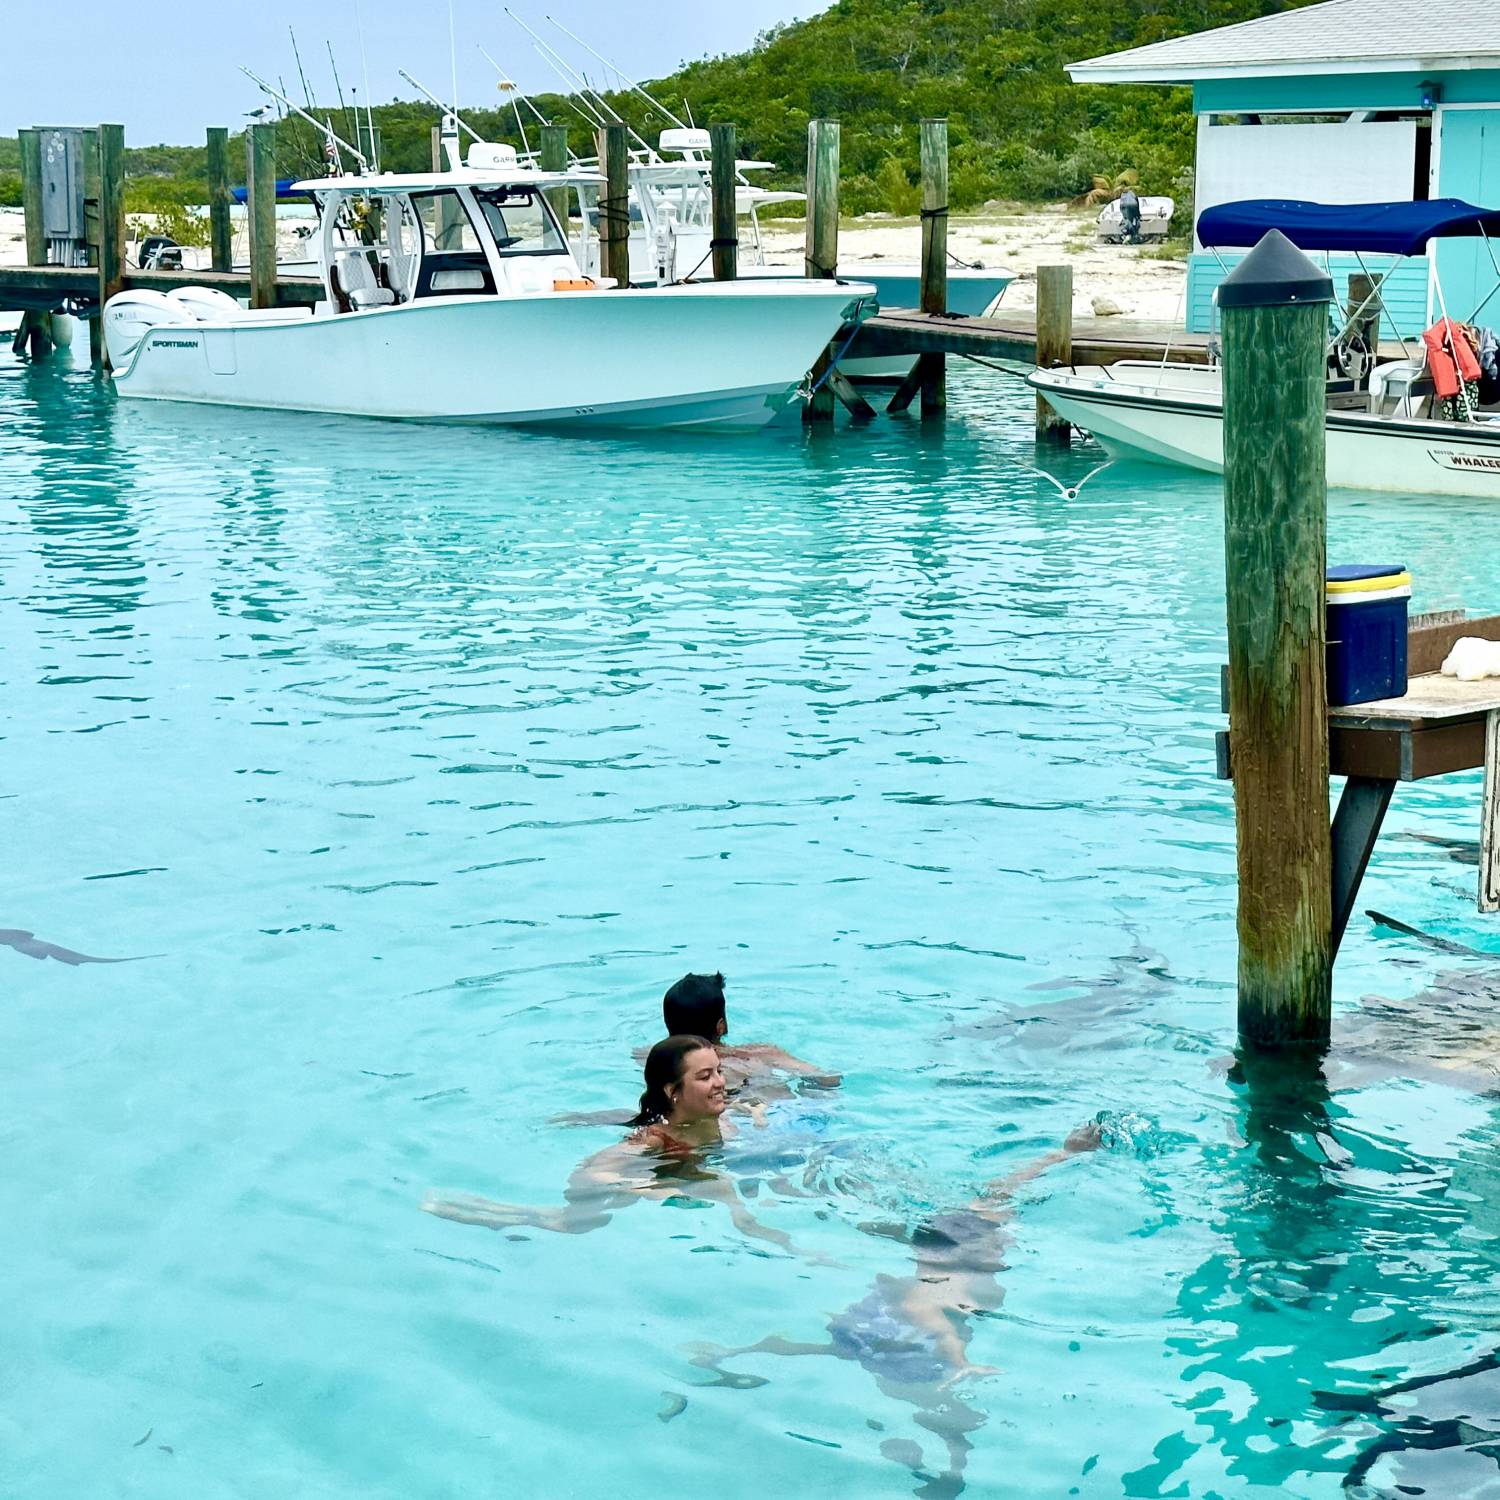 Title: Swimming with the sharks - On board their Sportsman Open 322 Center Console - Location: Compass Cay Bahamas. Participating in the Photo Contest #SportsmanJuly2023